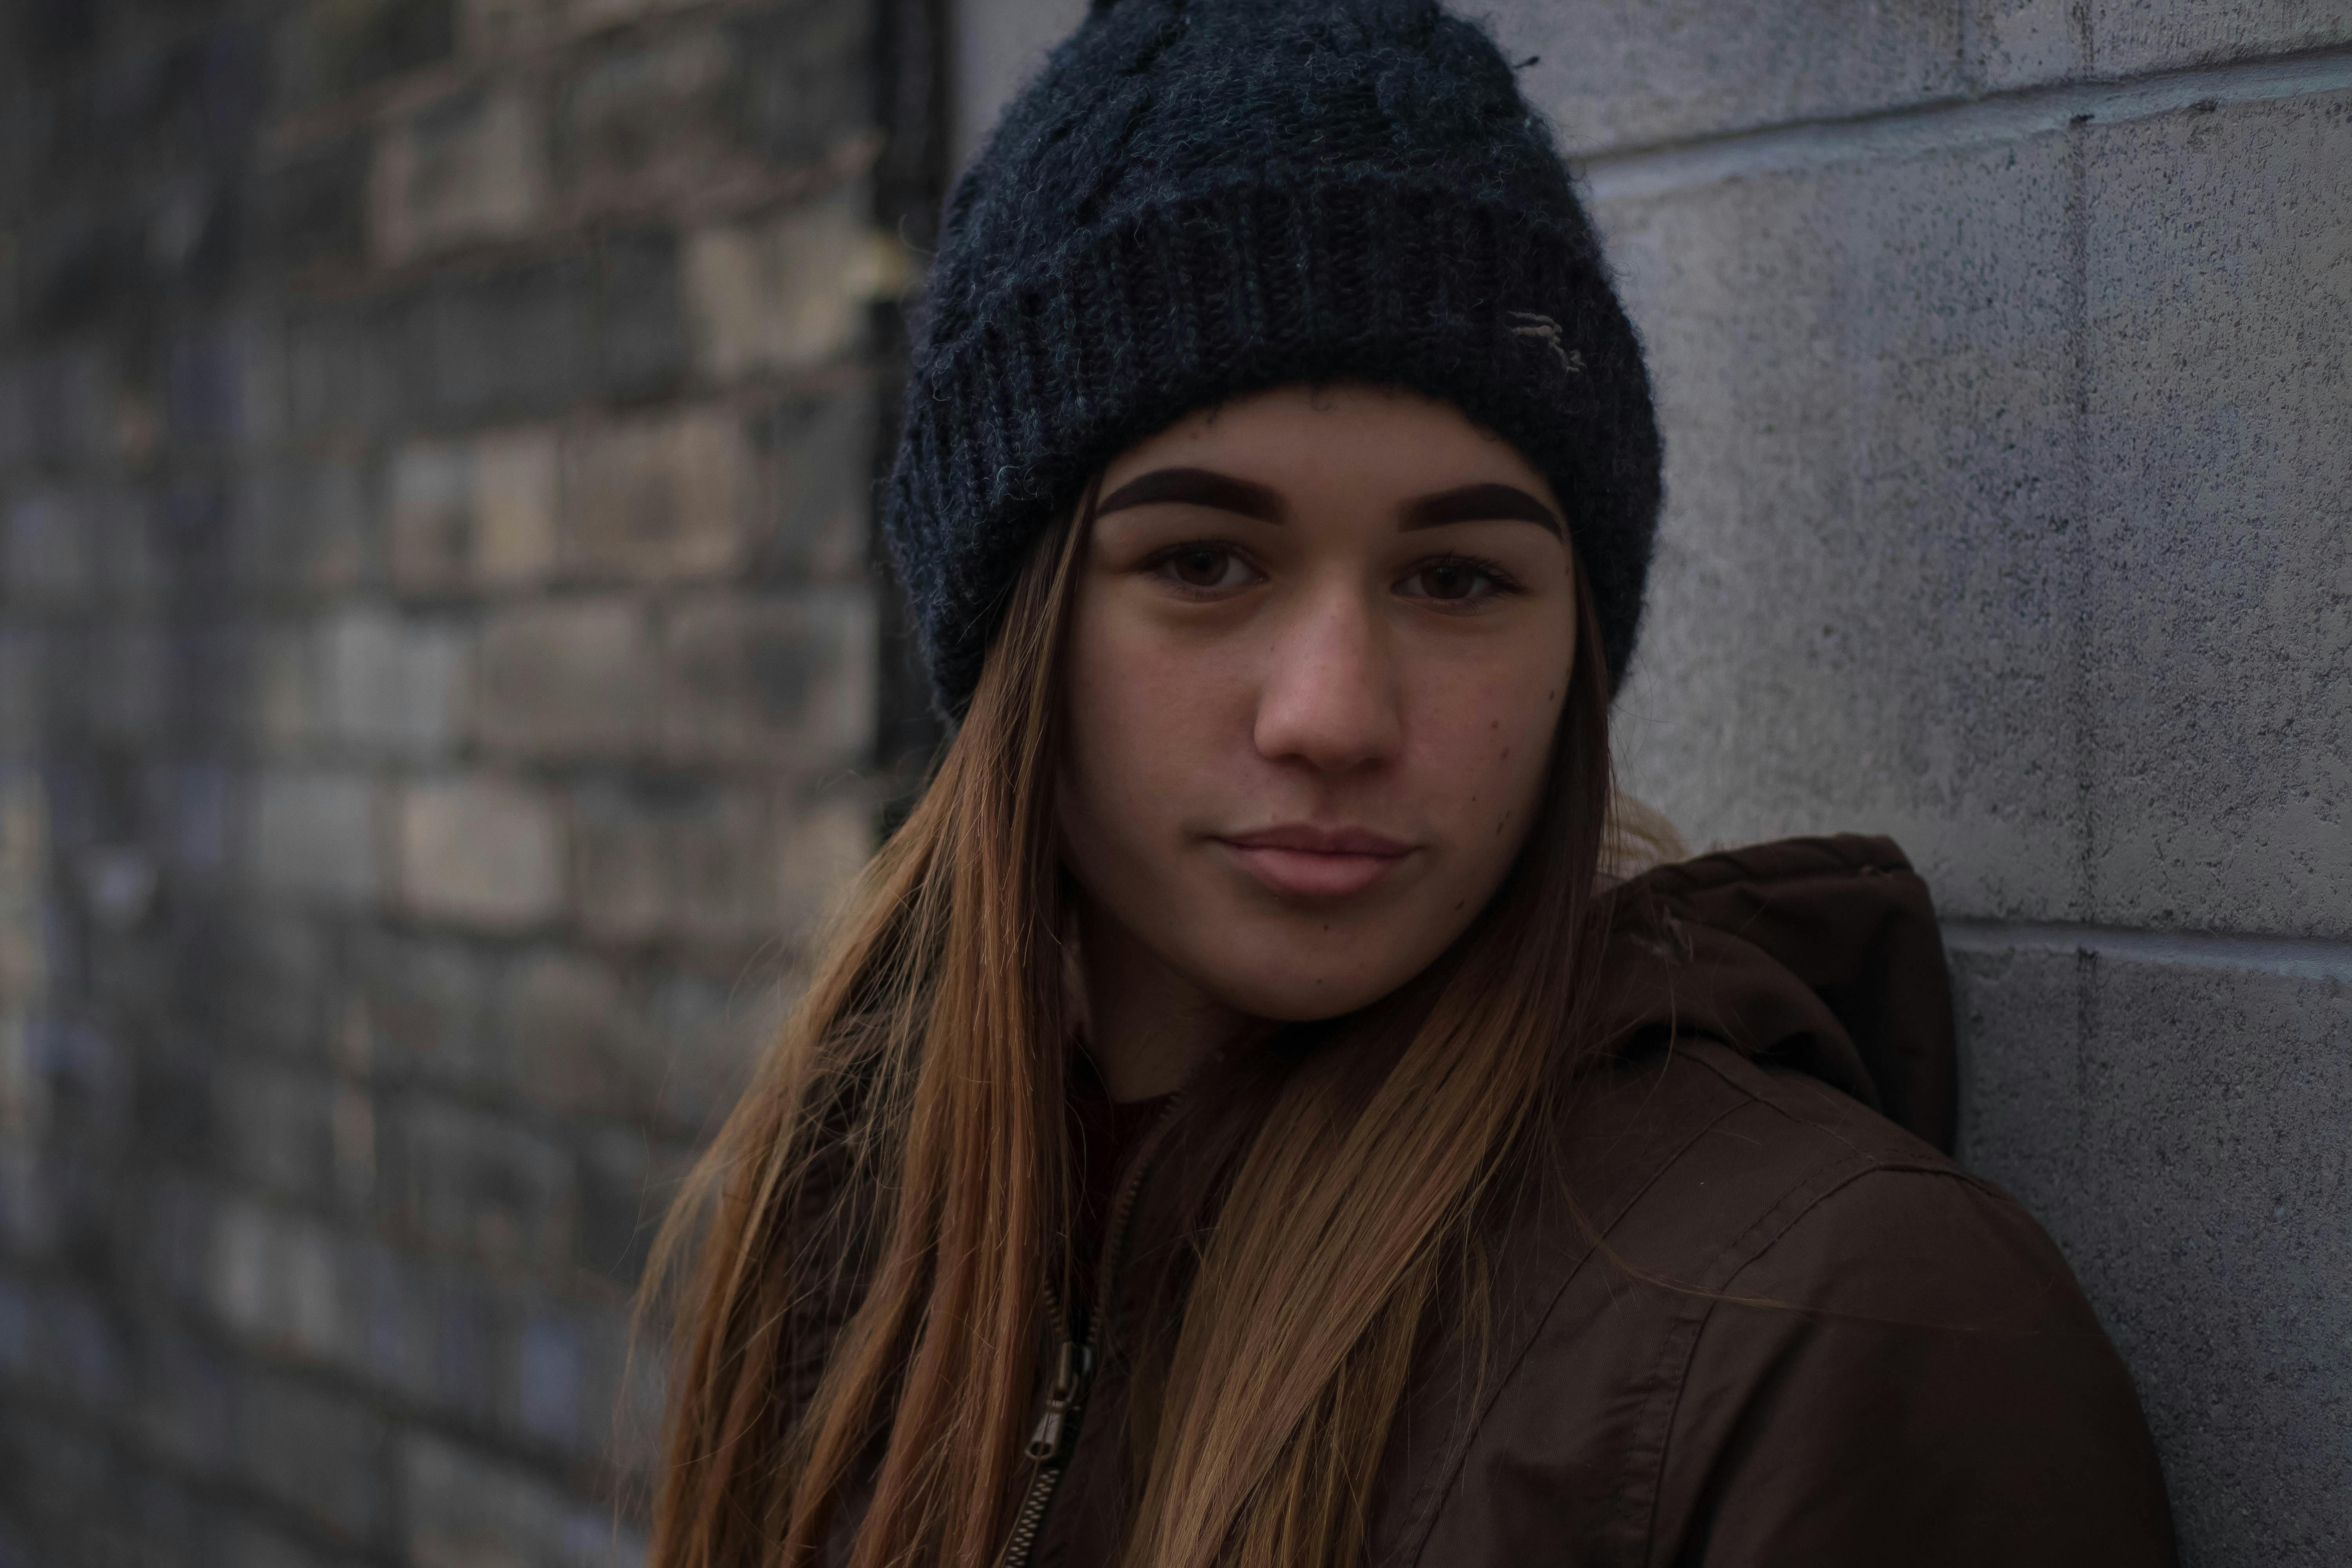 A neutral-looking teenage girl standing against a wall | Source: Pexels